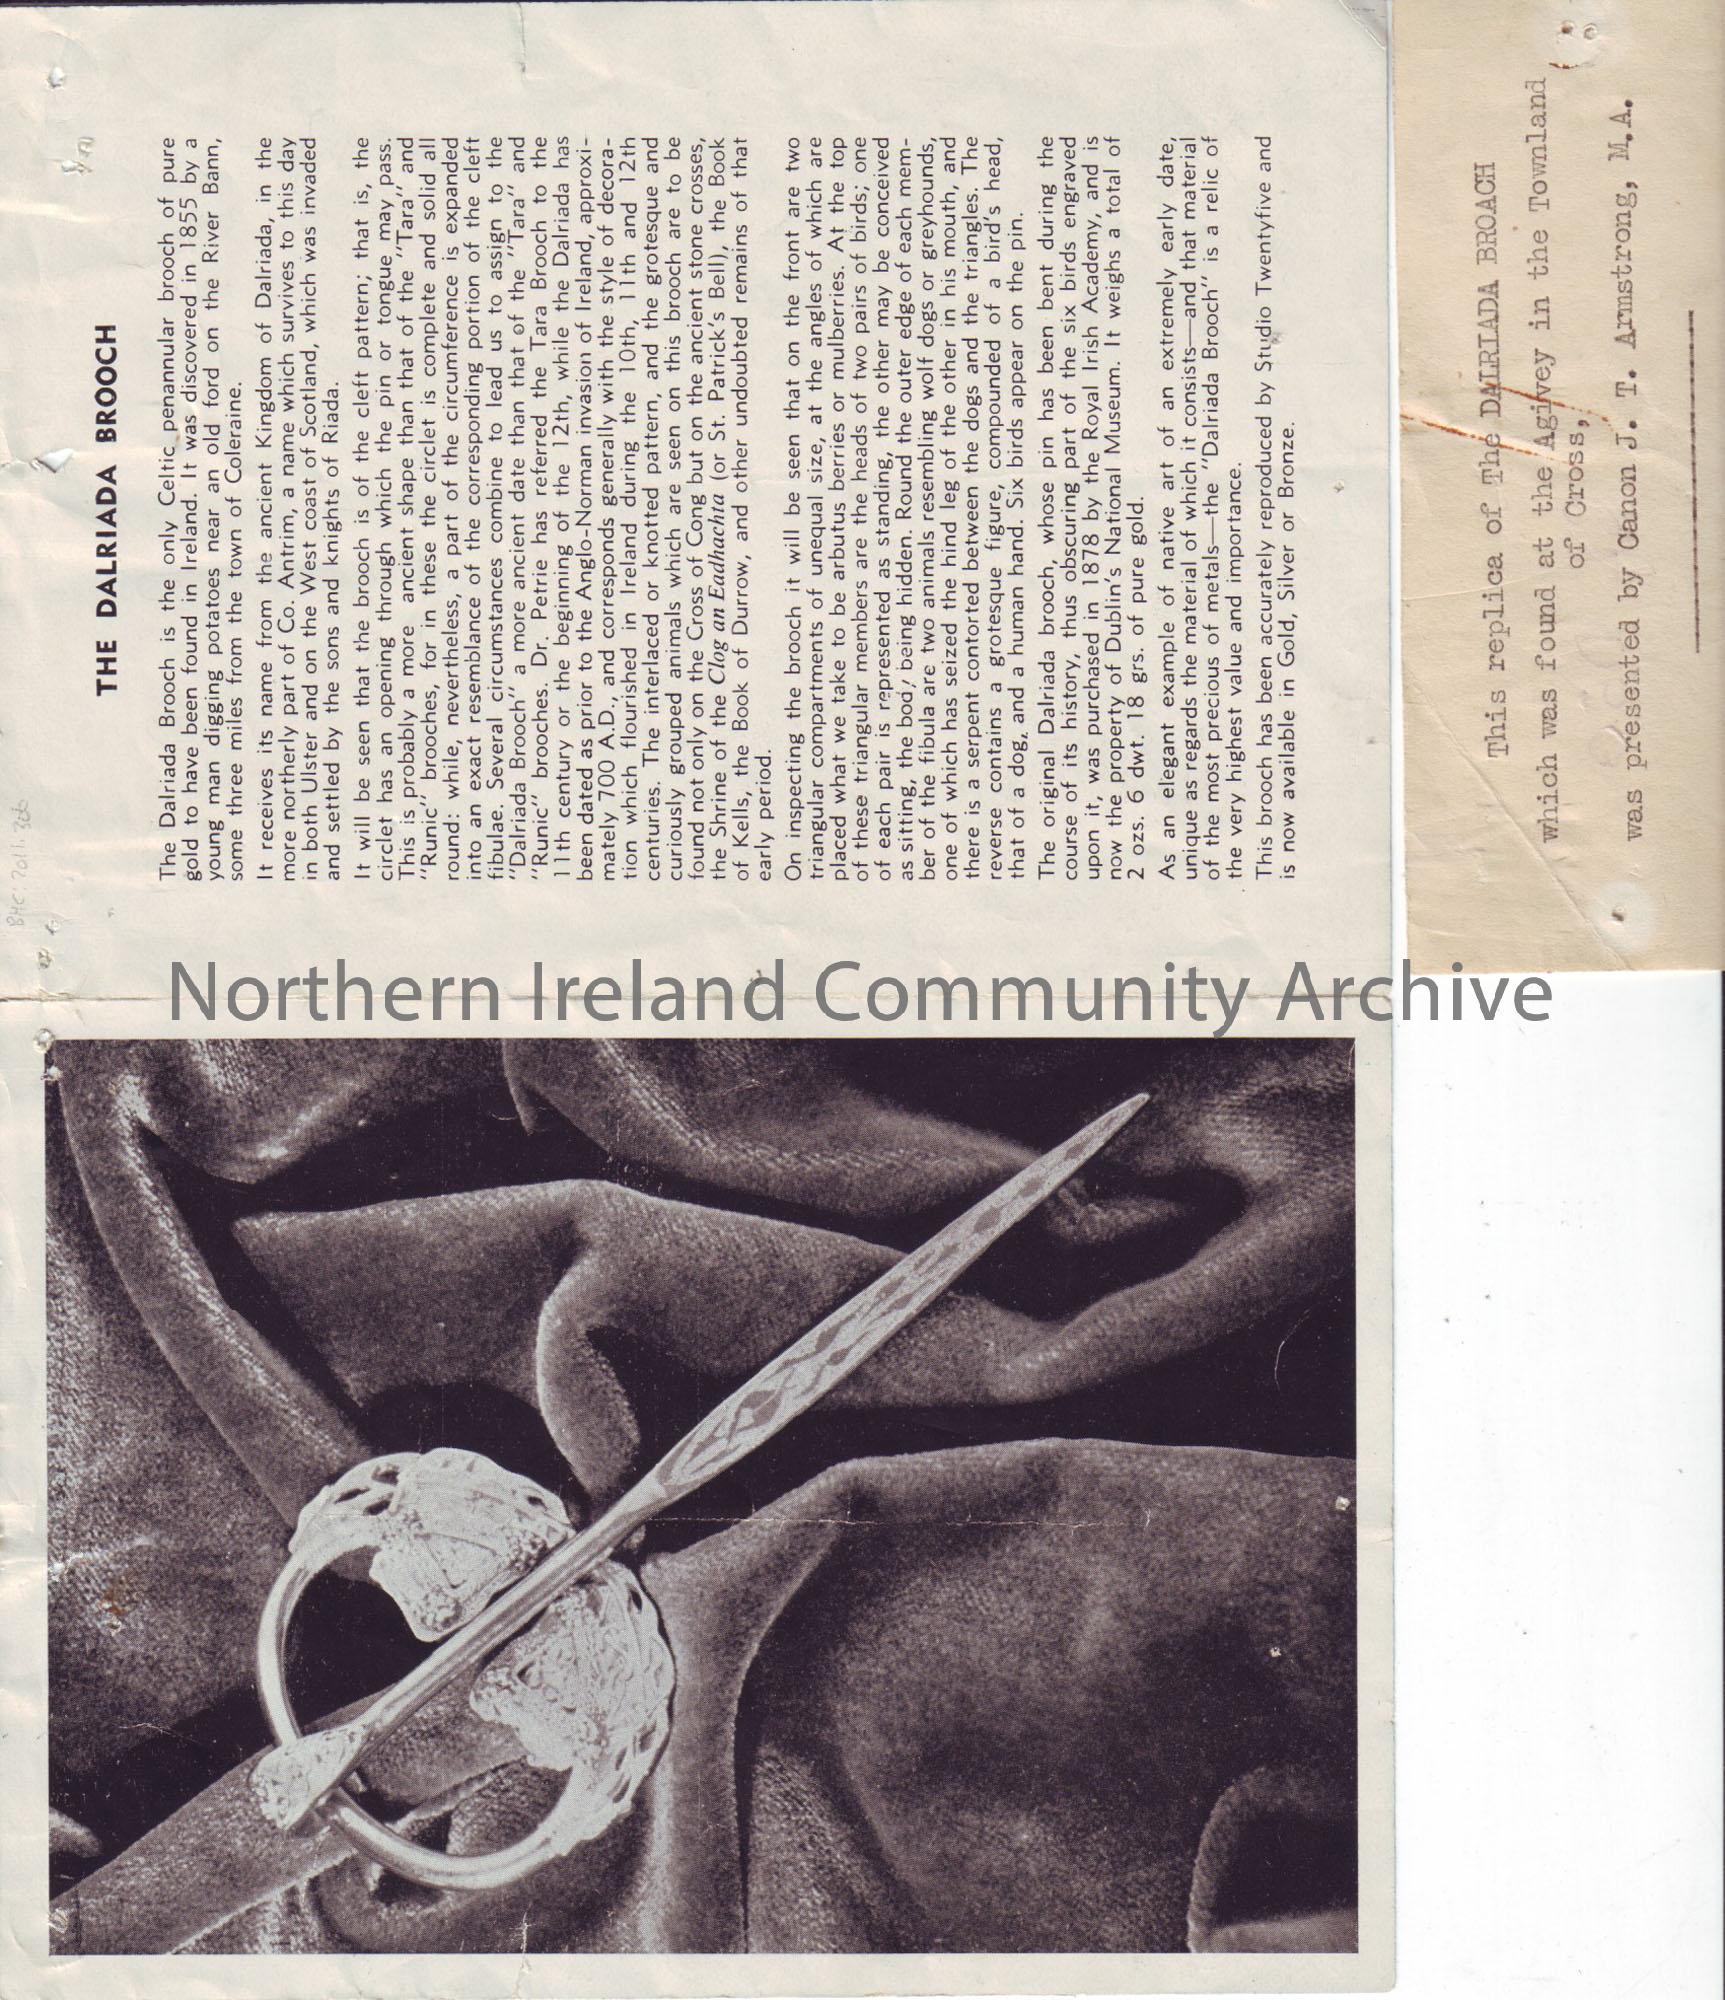 booklet showing photograph of the Dalriada brooch along with information